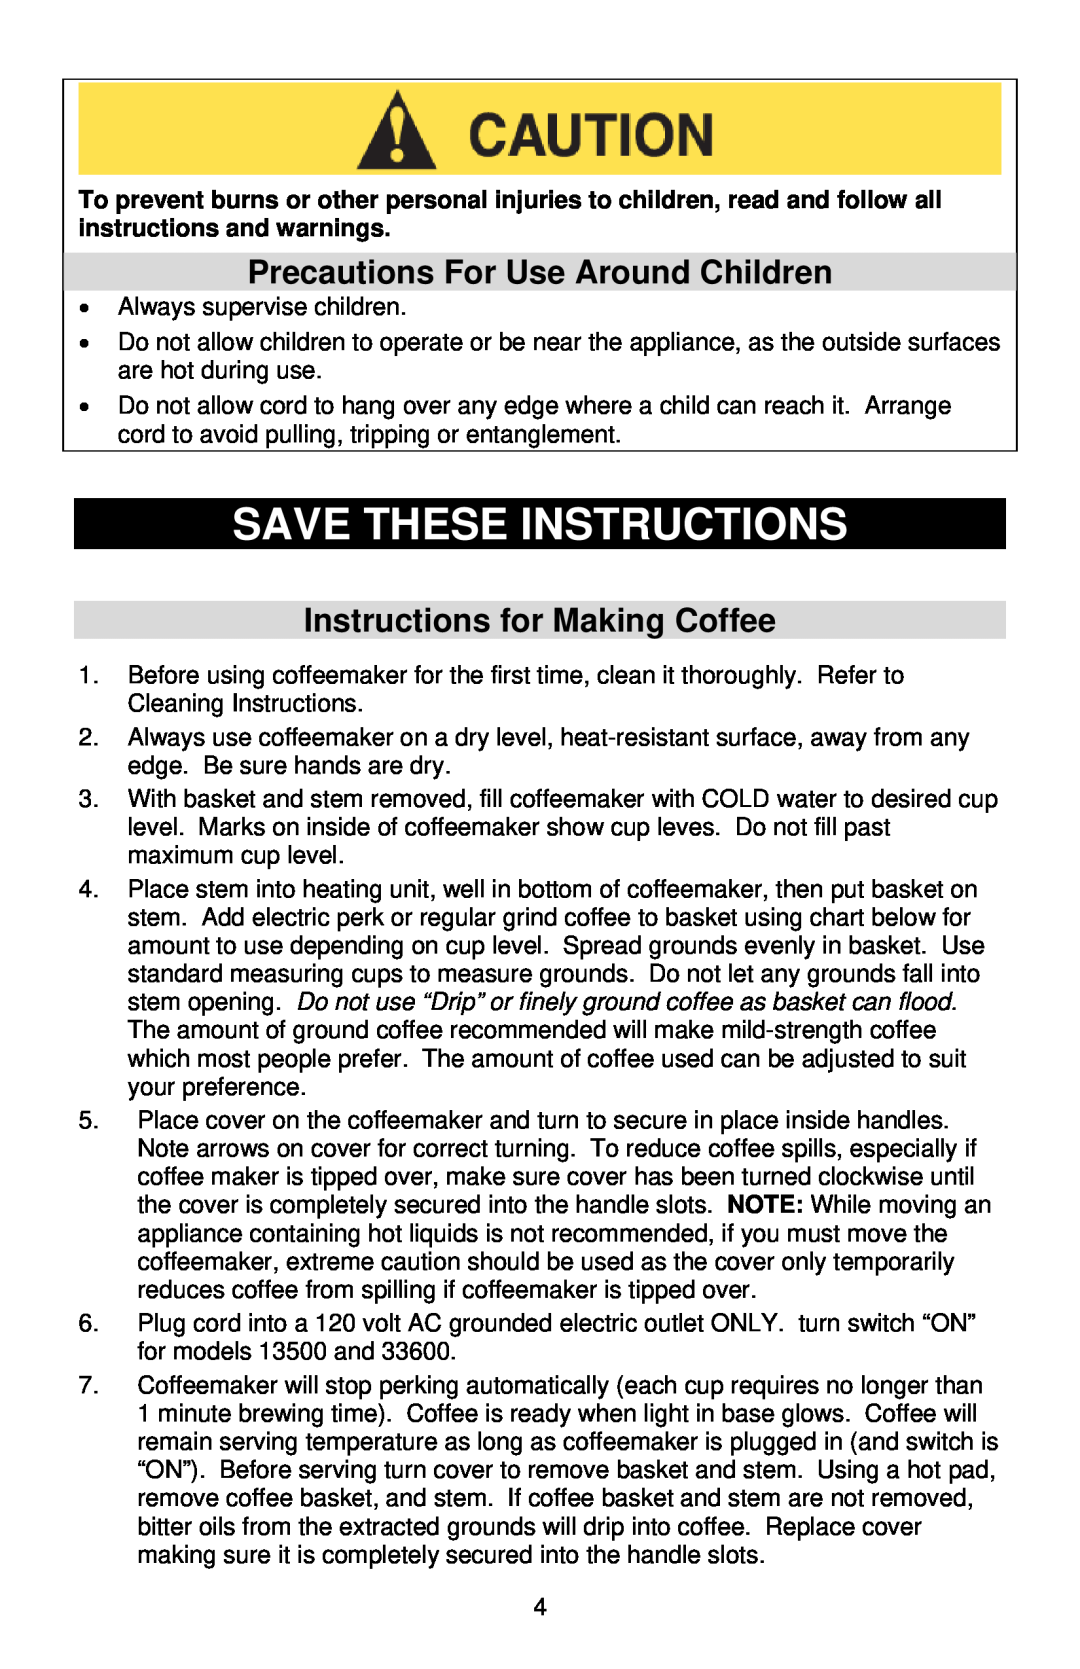 West Bend 59055 Save These Instructions, Precautions For Use Around Children, Instructions for Making Coffee 